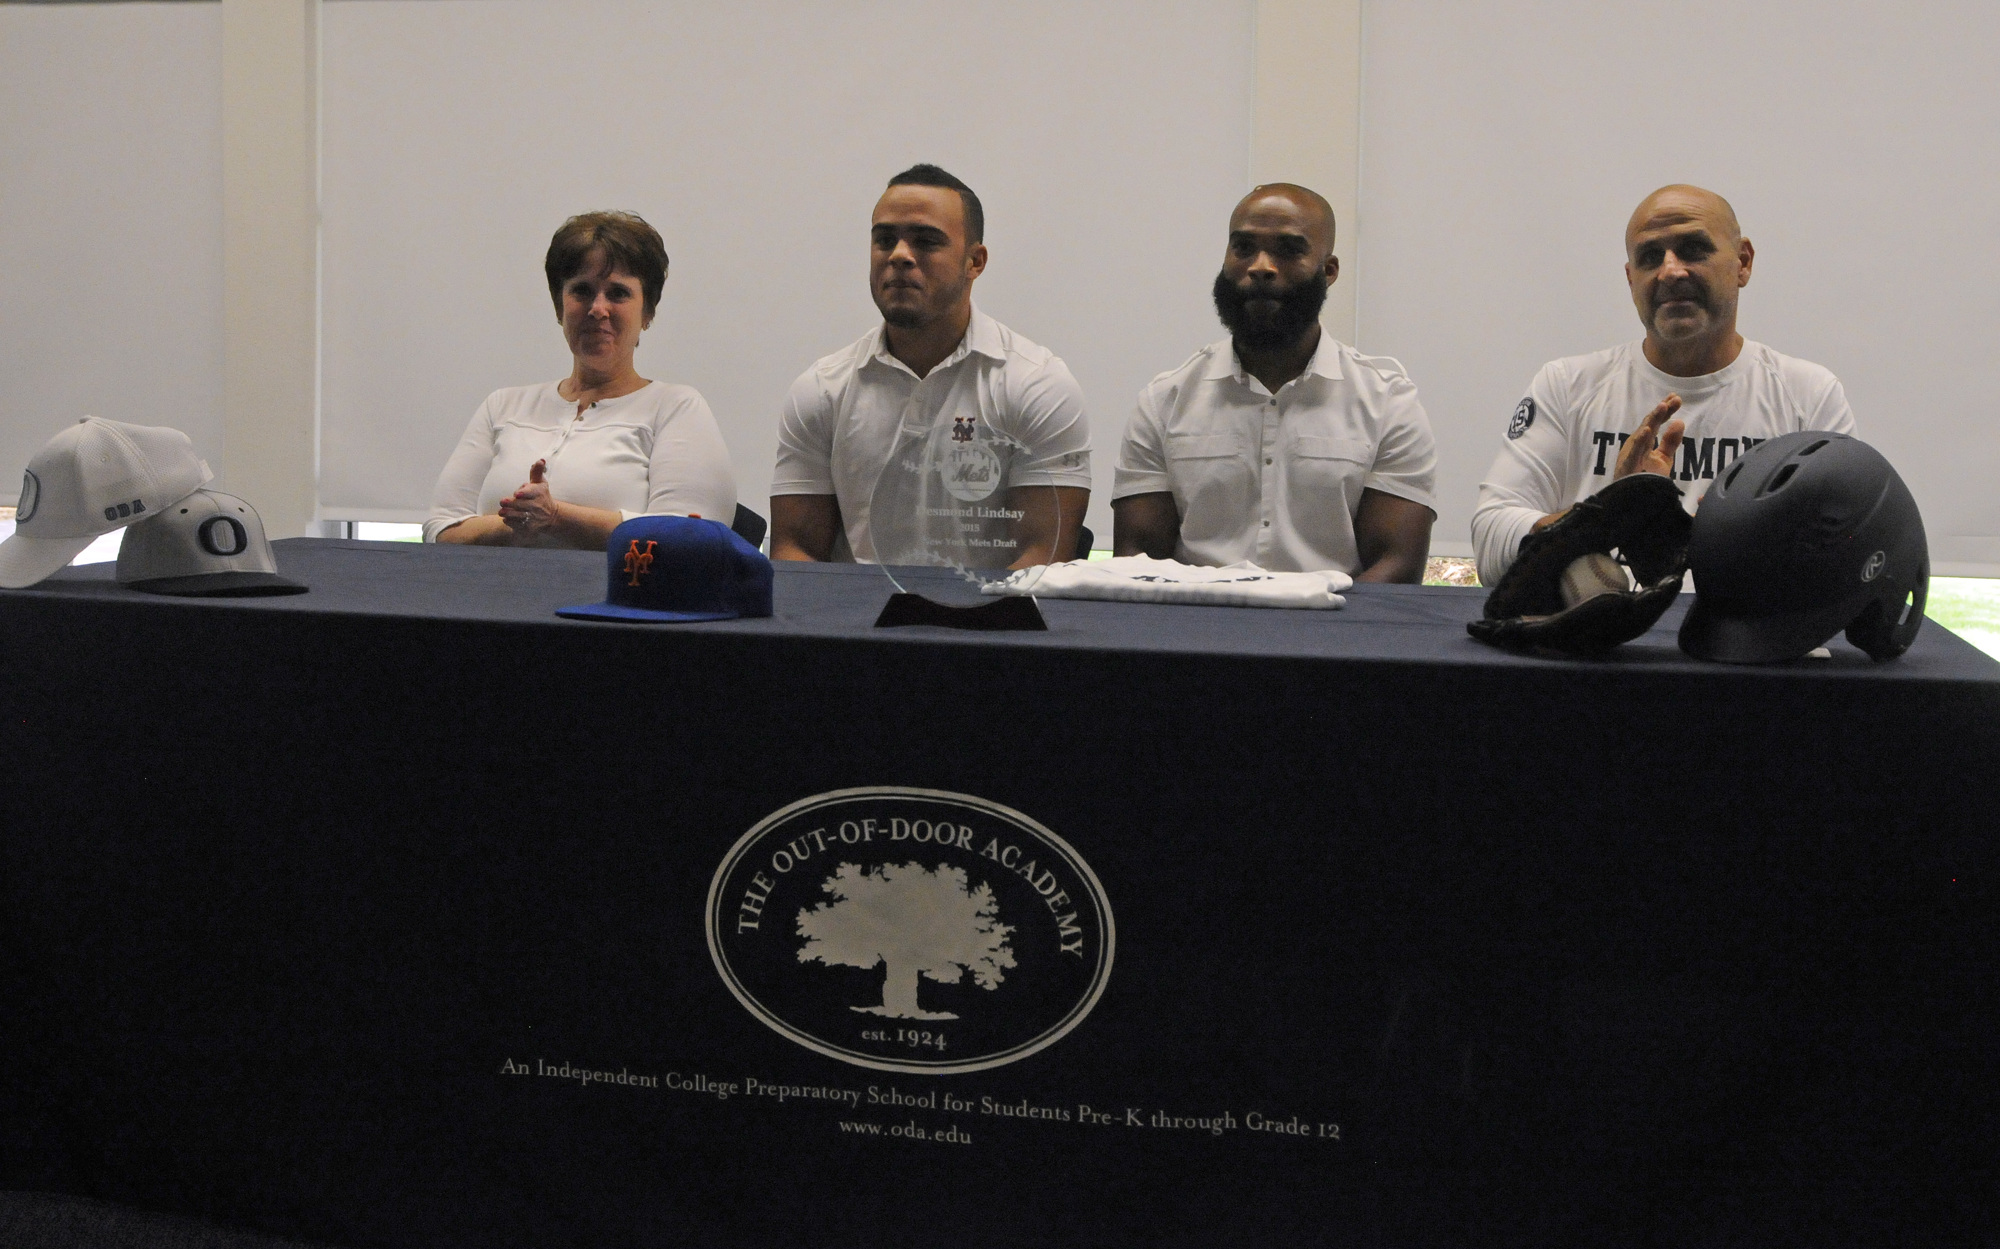 Desmond Lindsay, pictured with his mom, Robin, ODA strength and conditioning coach Rod Miller and ODA assistant coach Jimmy Kuebler, announced he would be reporting to Port St. Lucie June 22.